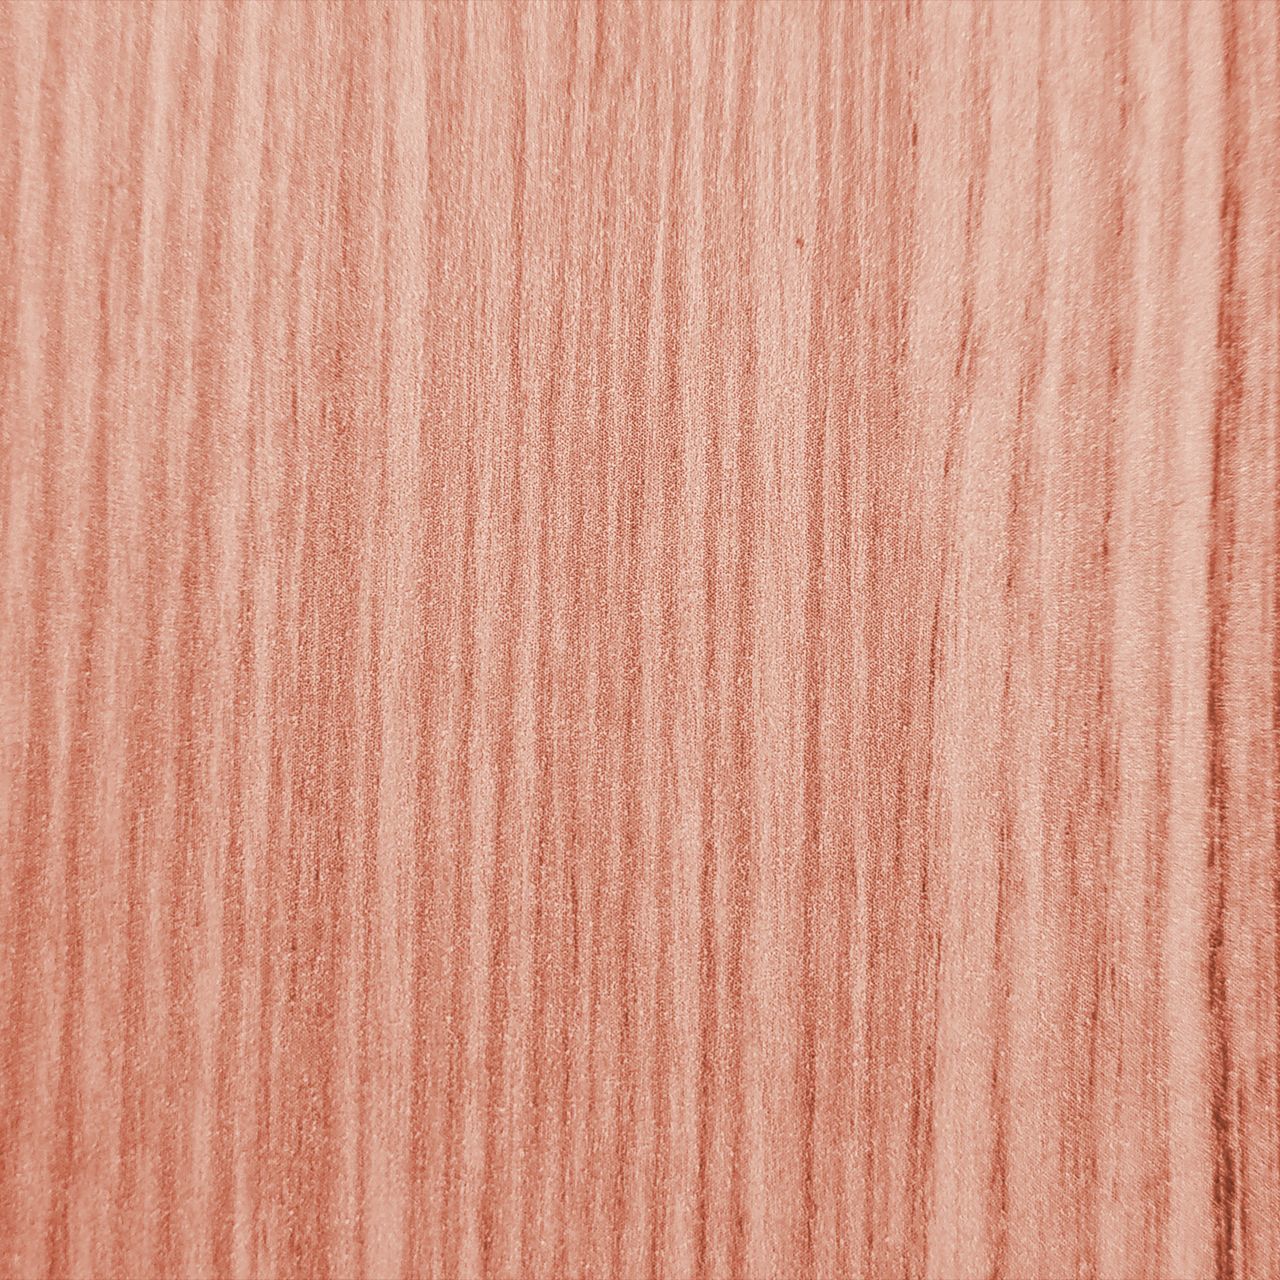 backgrounds, textured, pattern, full frame, brown, no people, laminate flooring, close-up, wood, material, floor, hardwood, wood stain, rough, red, flooring, textile, wood grain, striped, wood flooring, copy space, plywood, design element, indoors, abstract, macro